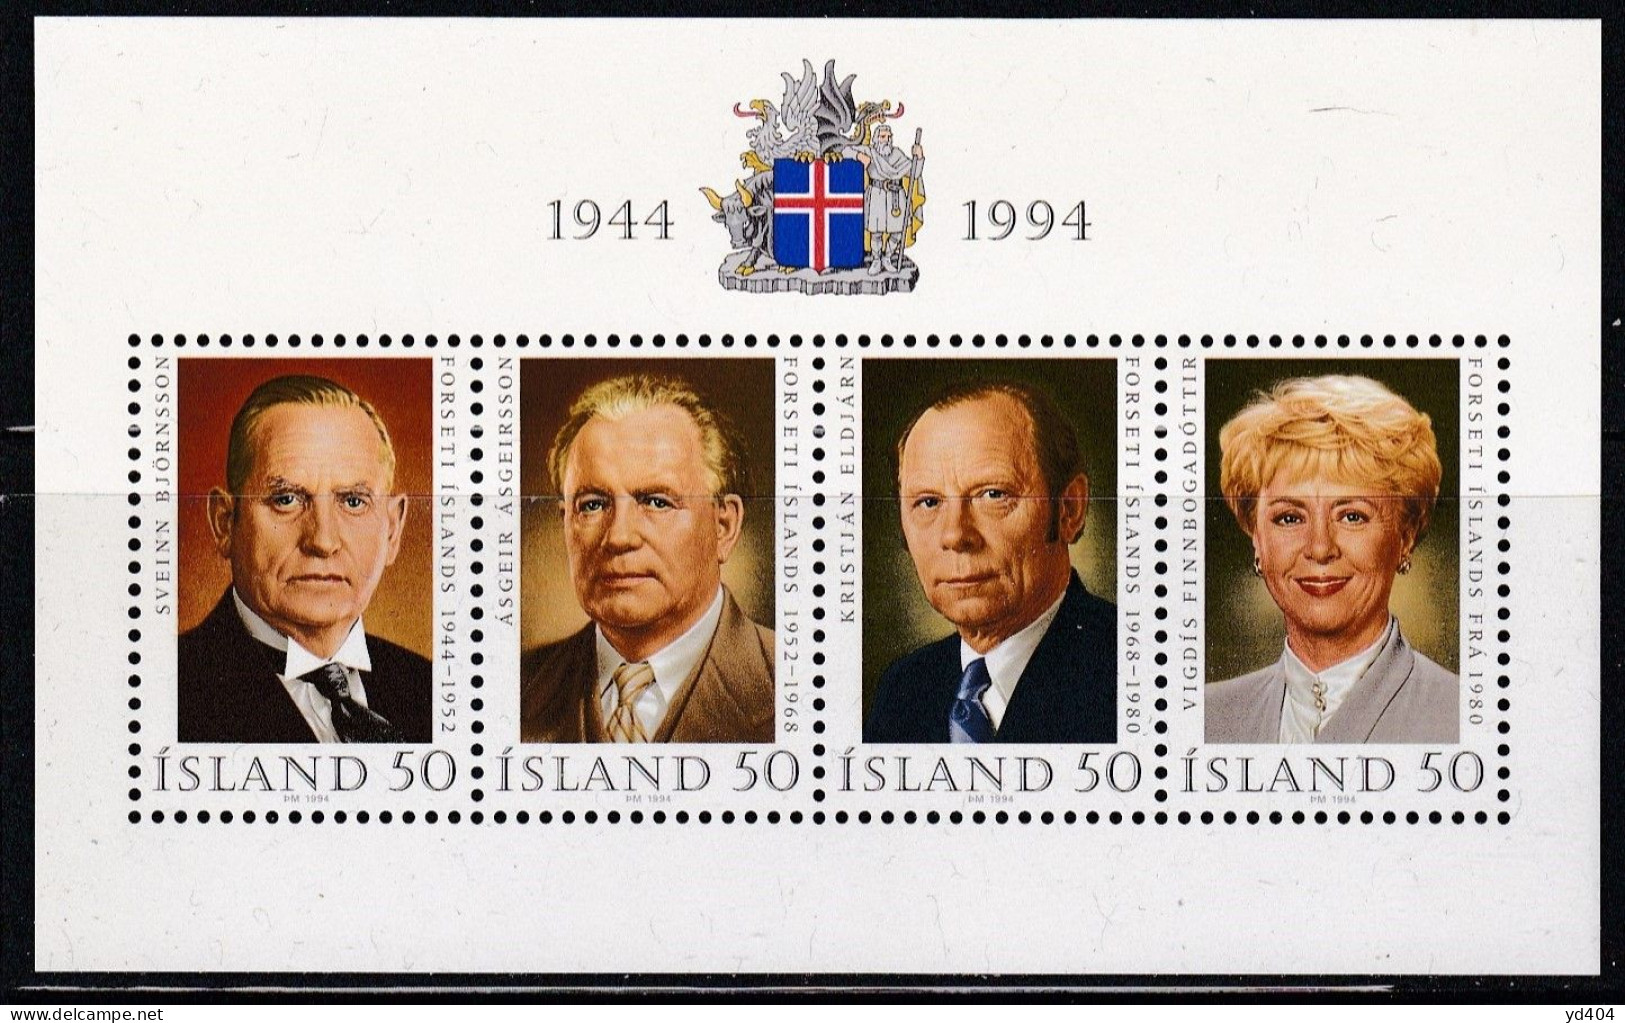 IS484 – ISLANDE – ICELAND – 1994 – 50th ANNIVERSARY OF REPUBLIC – SG # MS 829 MNH 11,50 € - Hojas Y Bloques